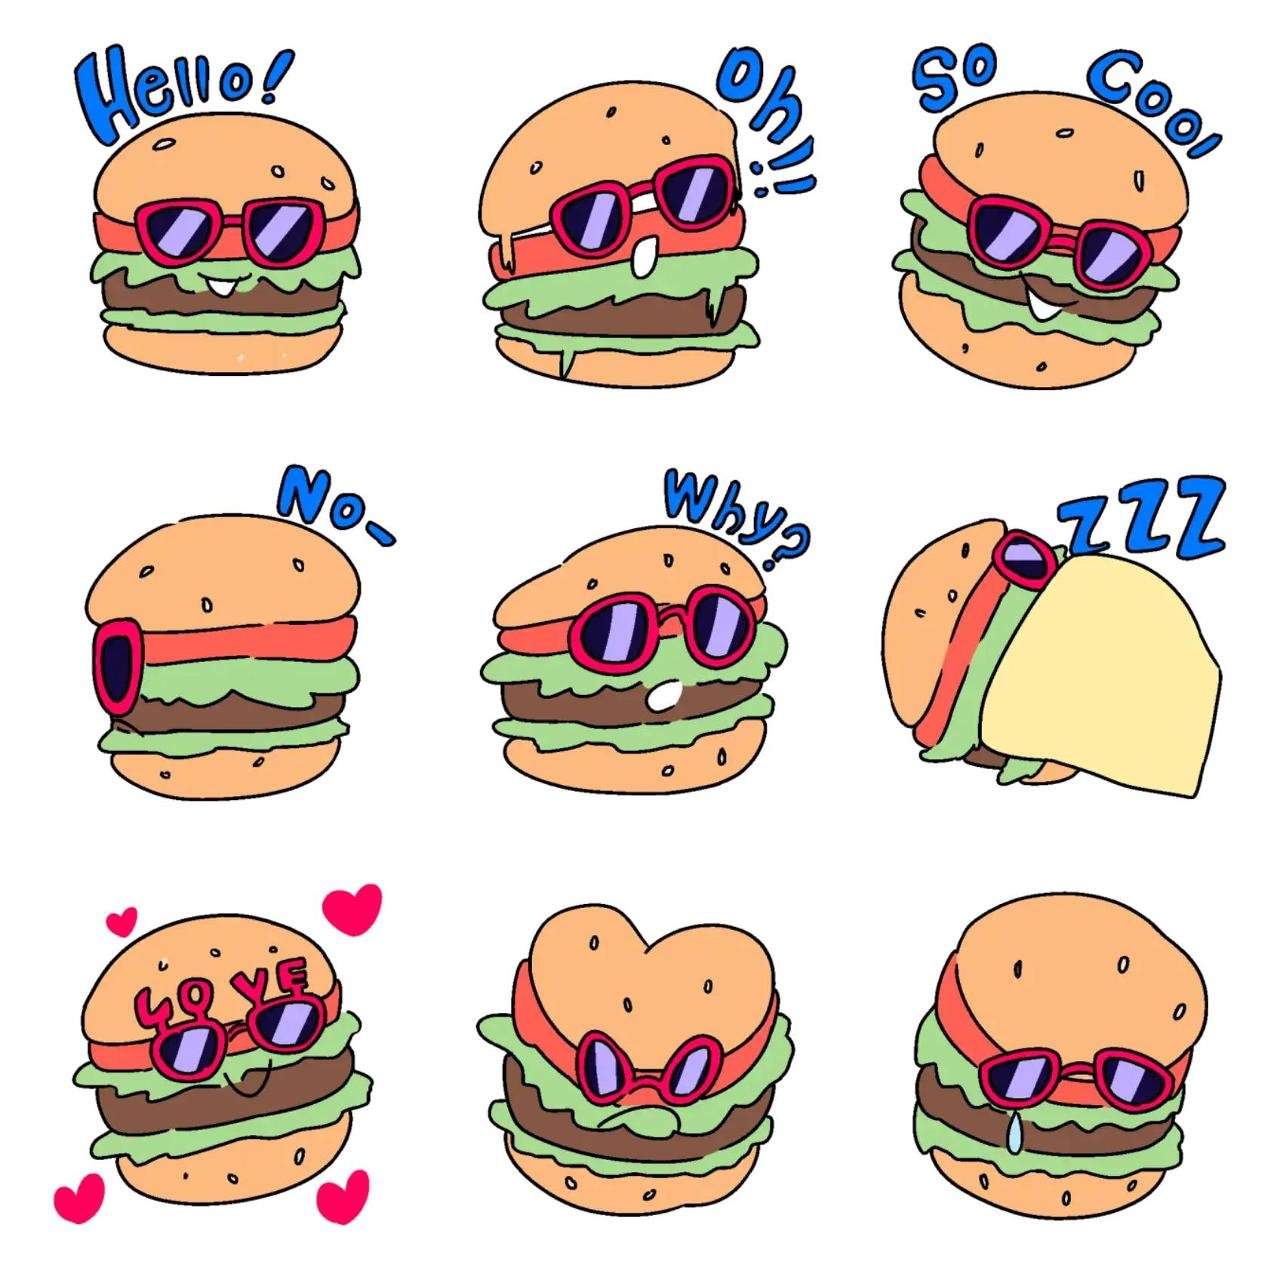 An exciting hamburger Animation/Cartoon,Food/Drink sticker pack for Whatsapp, Telegram, Signal, and others chatting and message apps